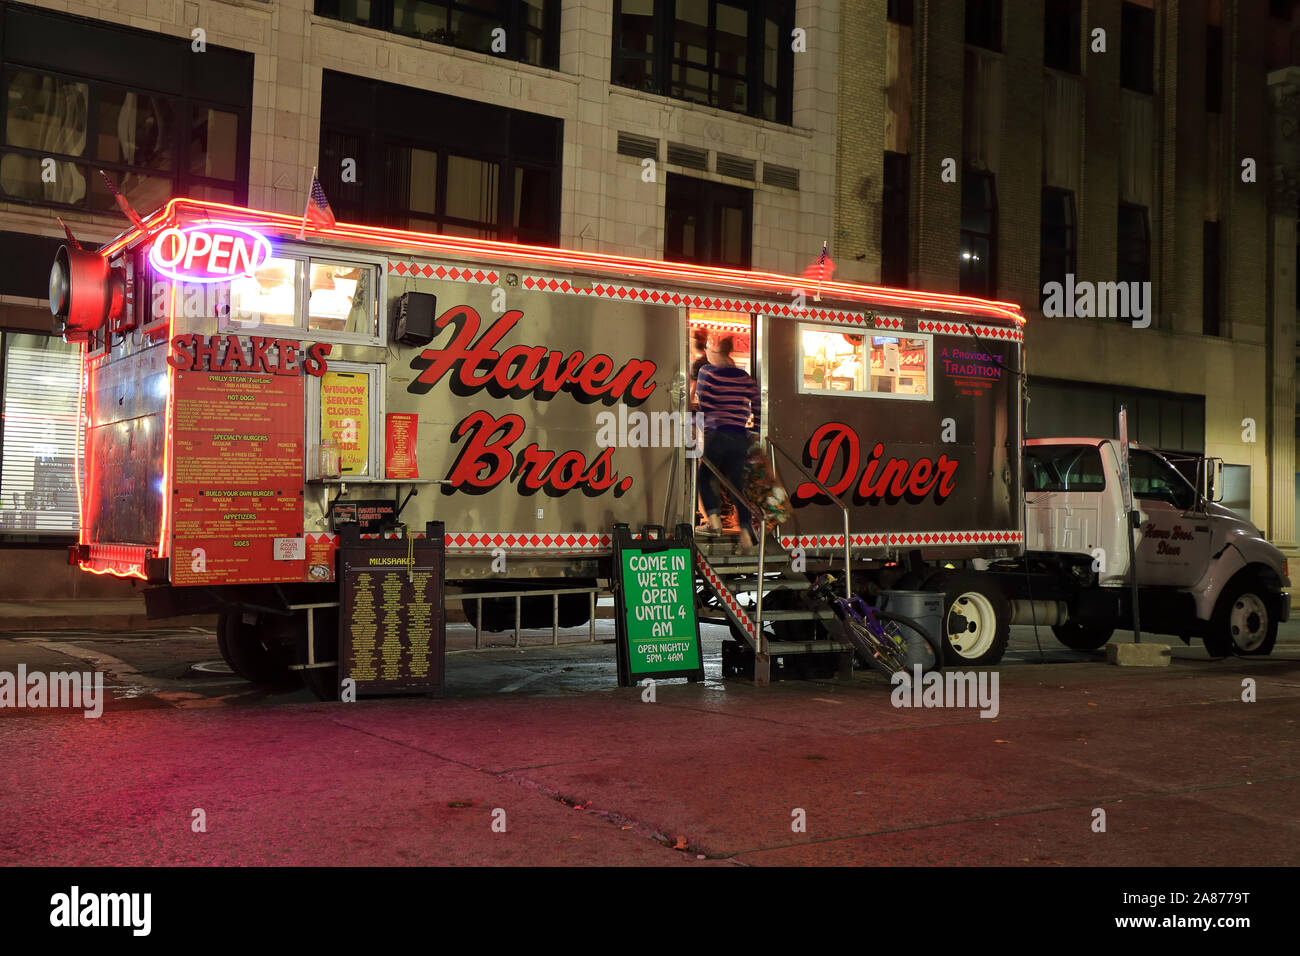 Haven Bros. Diner, Downtown Providence, Rhode Island Stockfoto